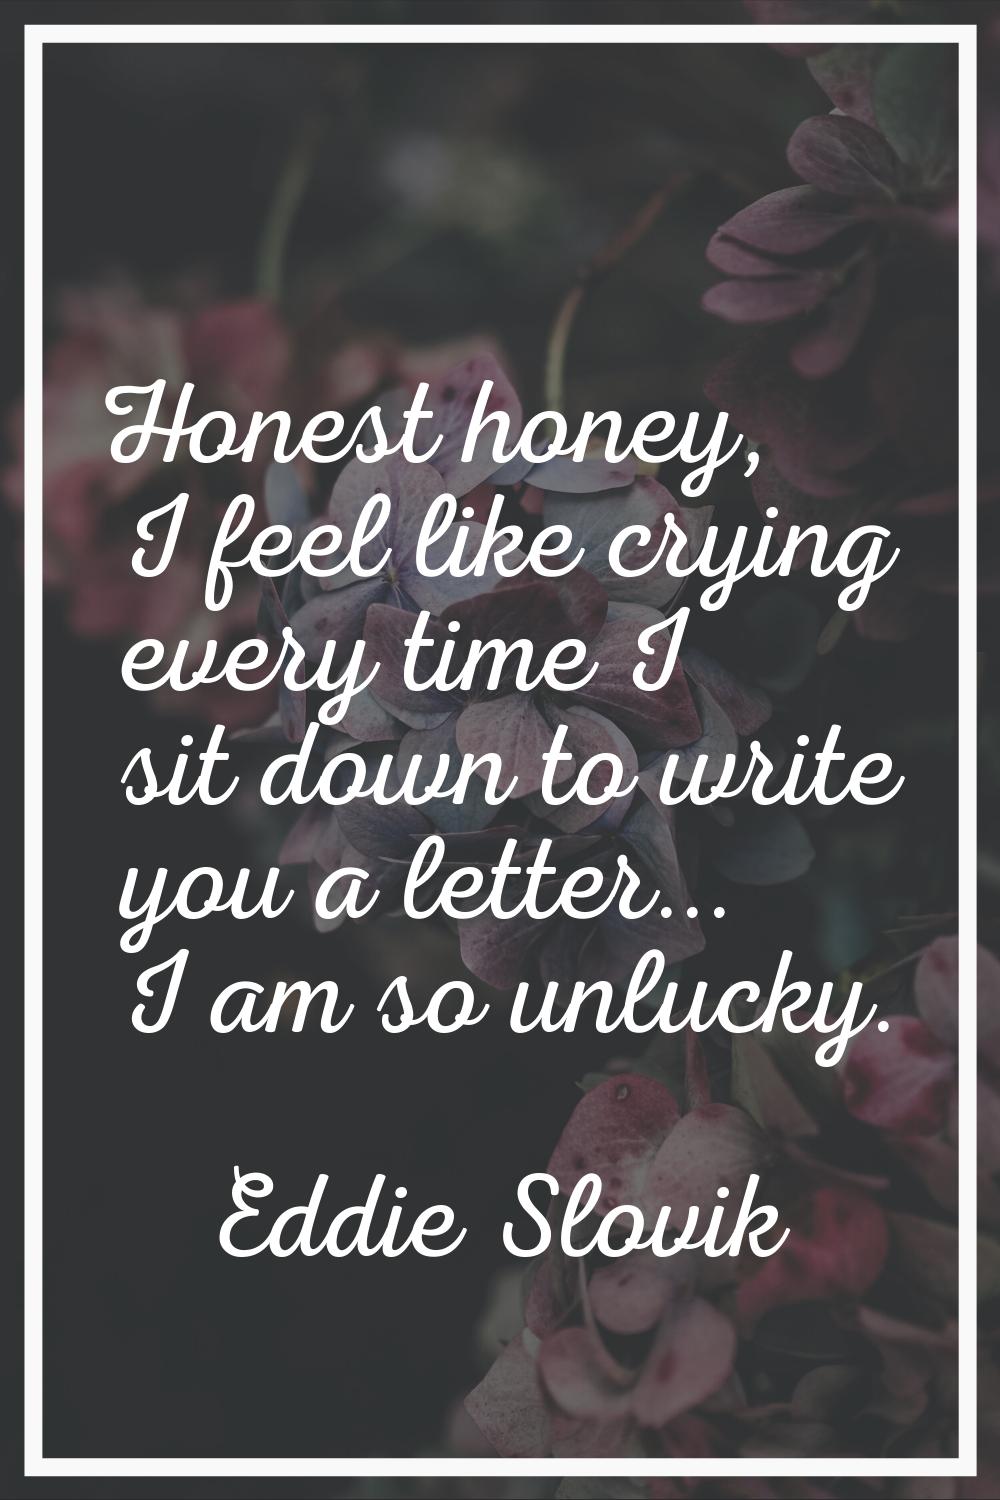 Honest honey, I feel like crying every time I sit down to write you a letter... I am so unlucky.